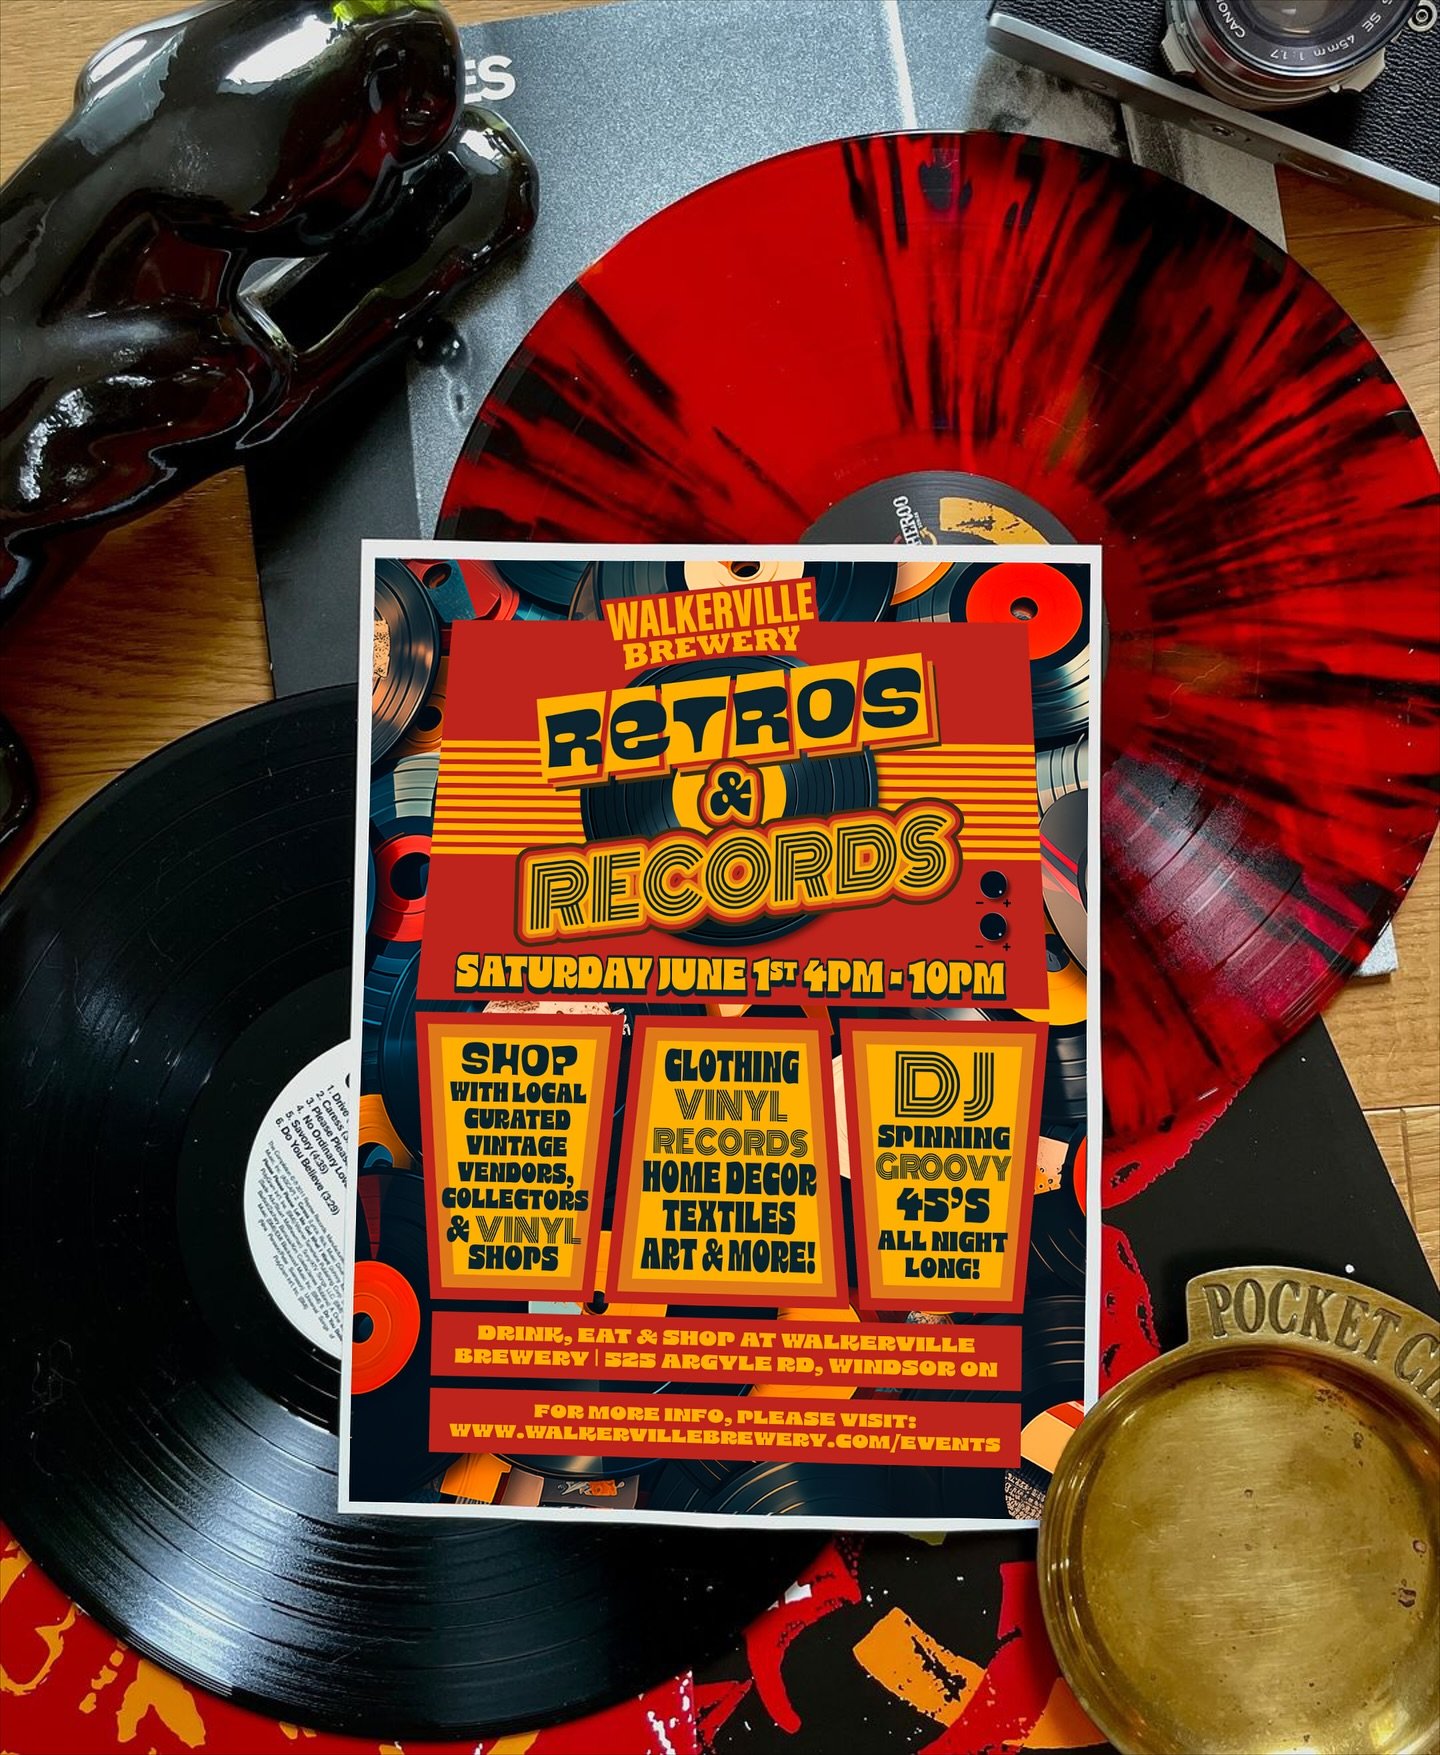 ⚡Retros &amp; Records Night⚡

Back by popular demand, join us on Saturday, June 1st from 4-10PM!

We&rsquo;re bringing together the best local curated vendors offering a treasure trove of vintage clothing, vinyl records, and retro collectibles.

⚡ Sh